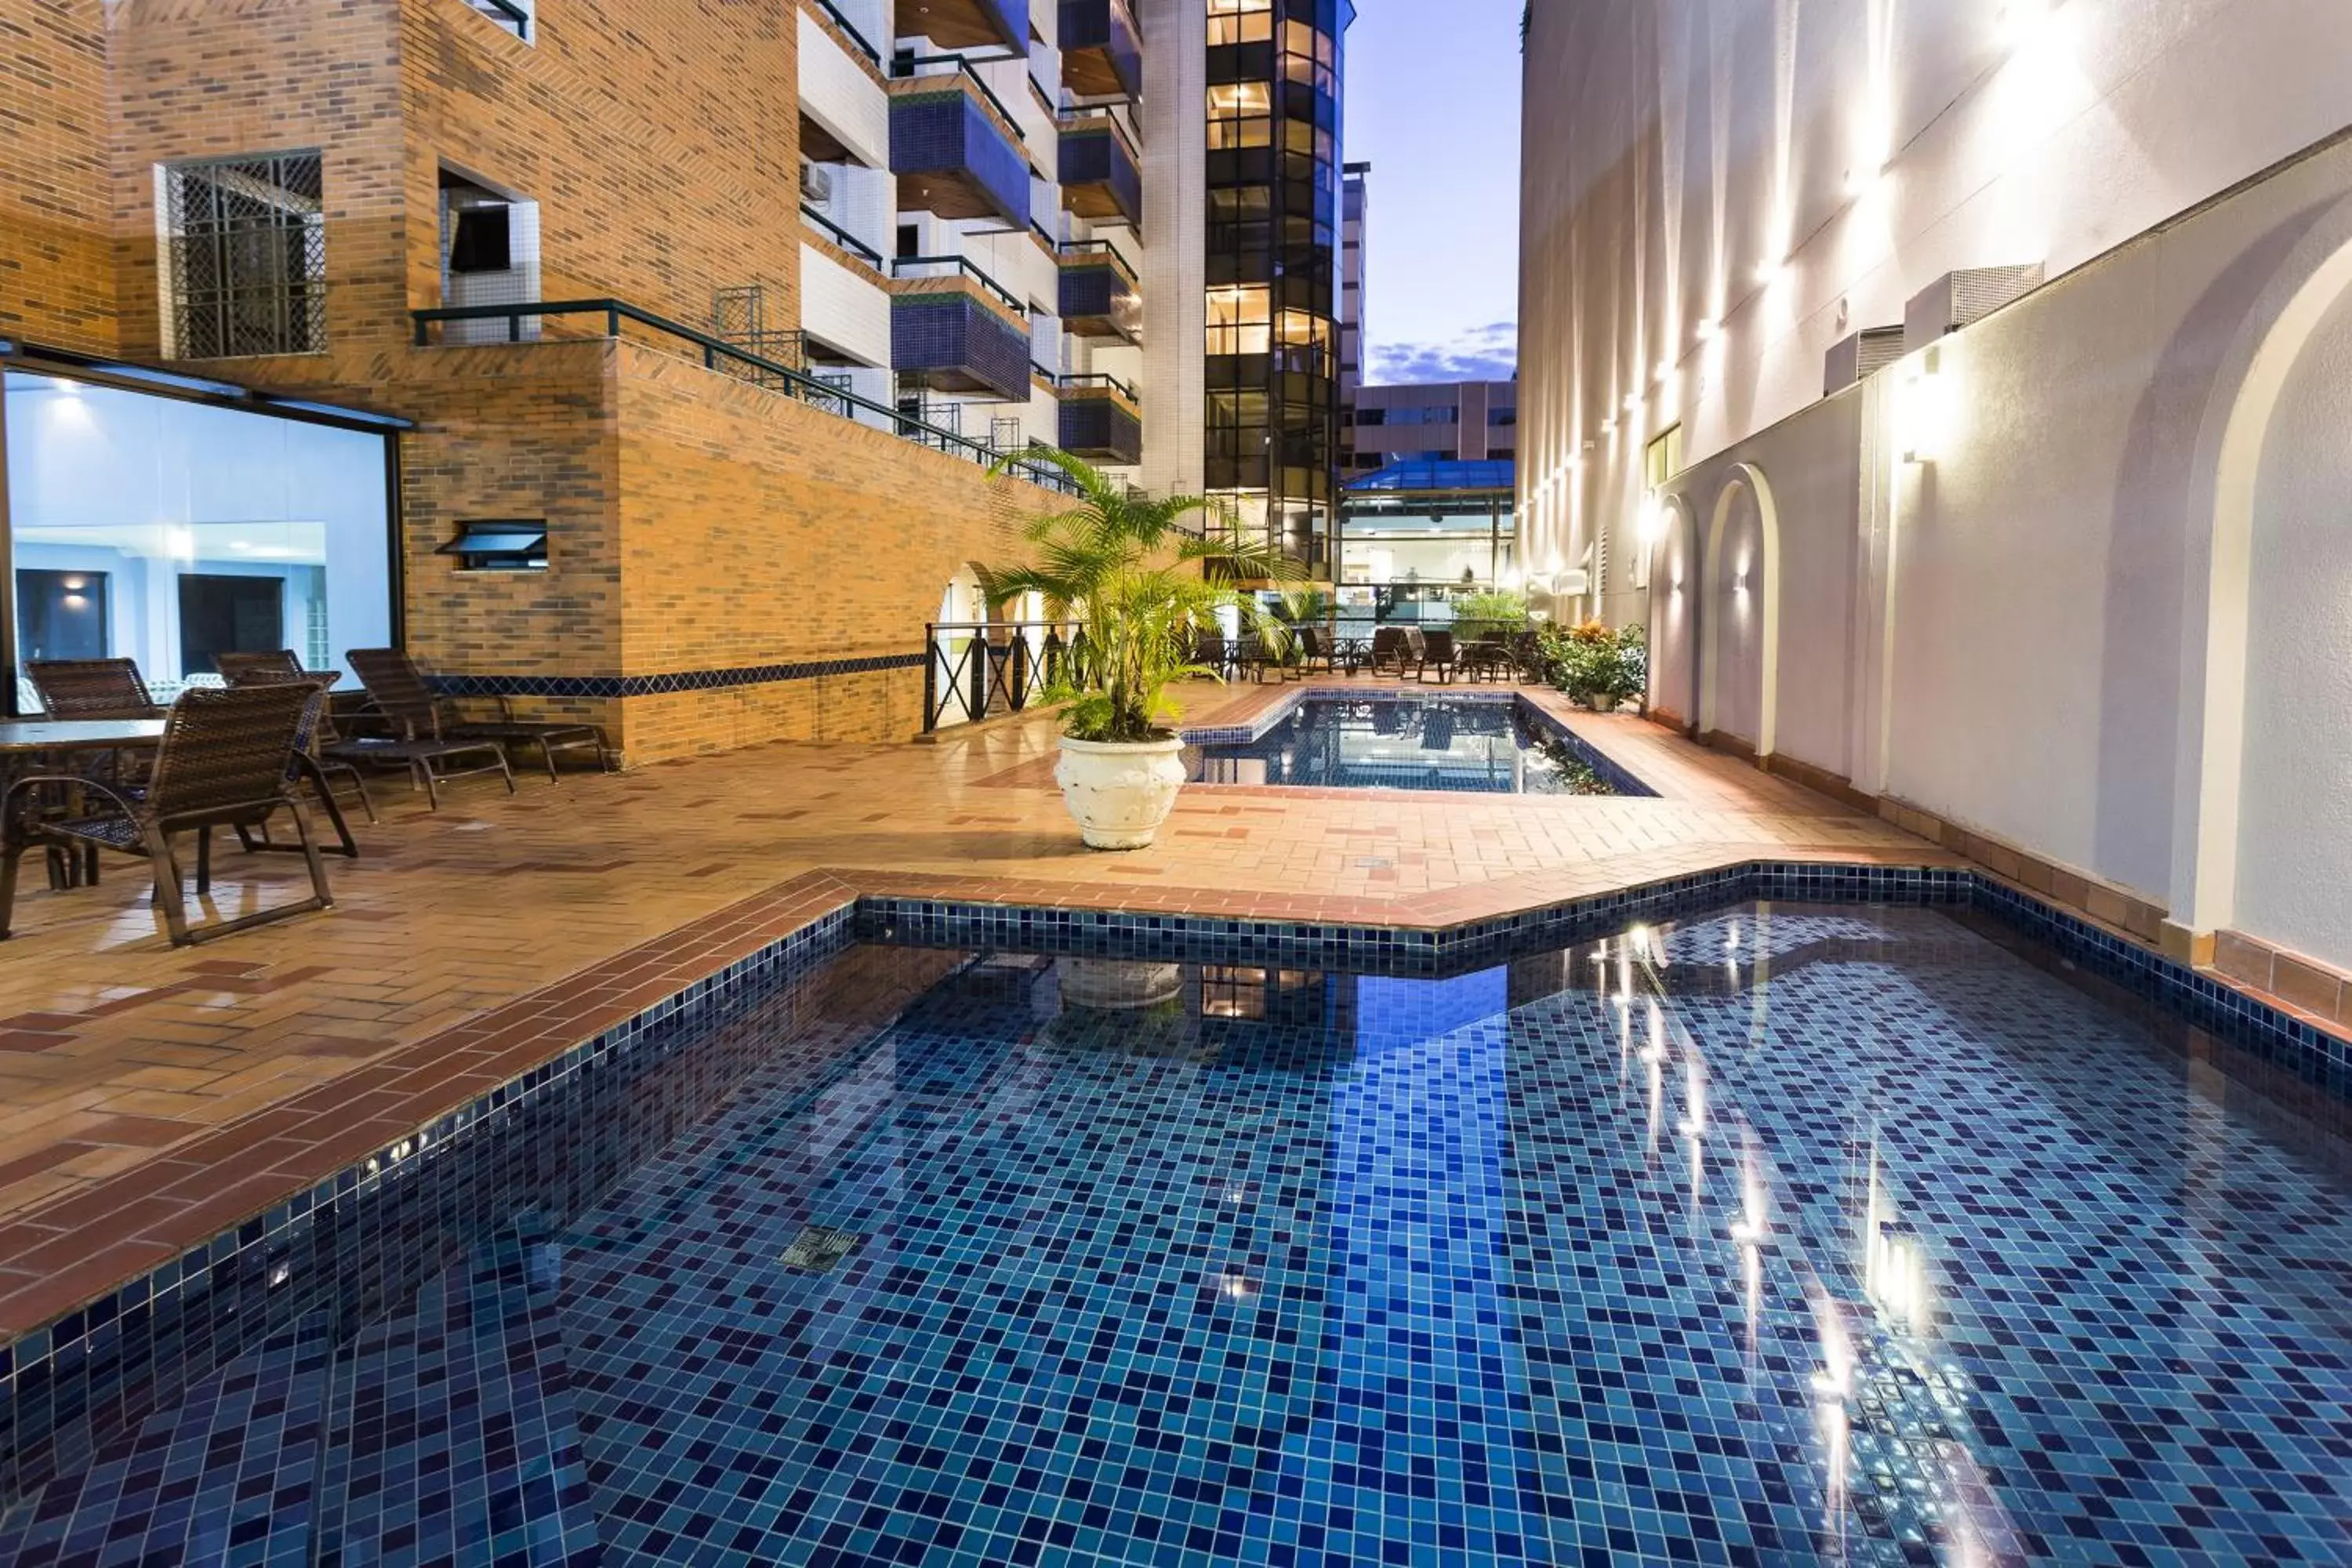 Property building, Swimming Pool in HM Hotel